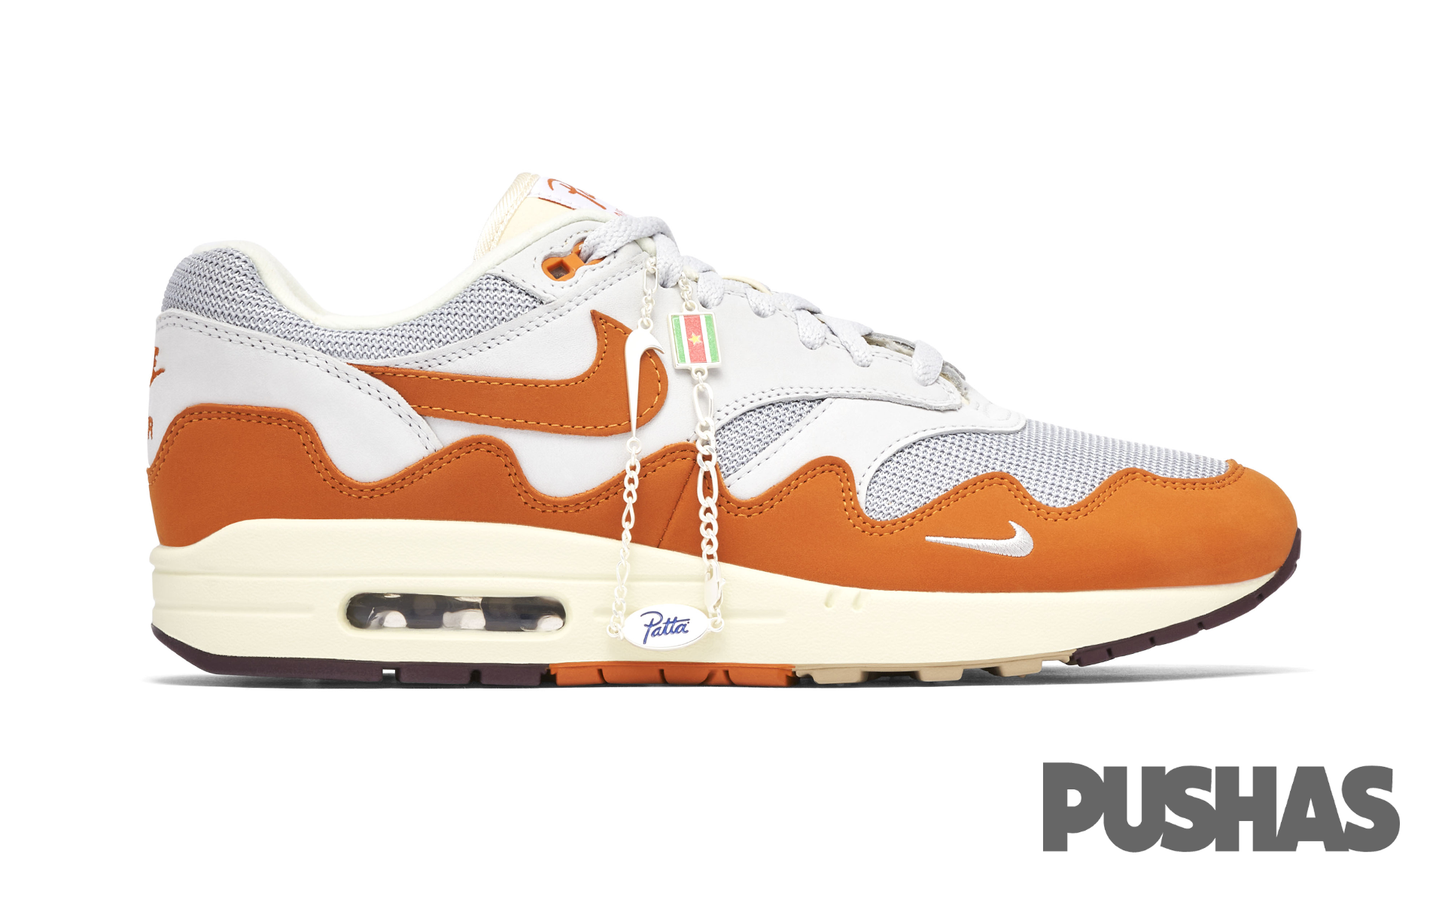 Air Max 1 'Patta Waves Monarch' - With Bracelet (2021)